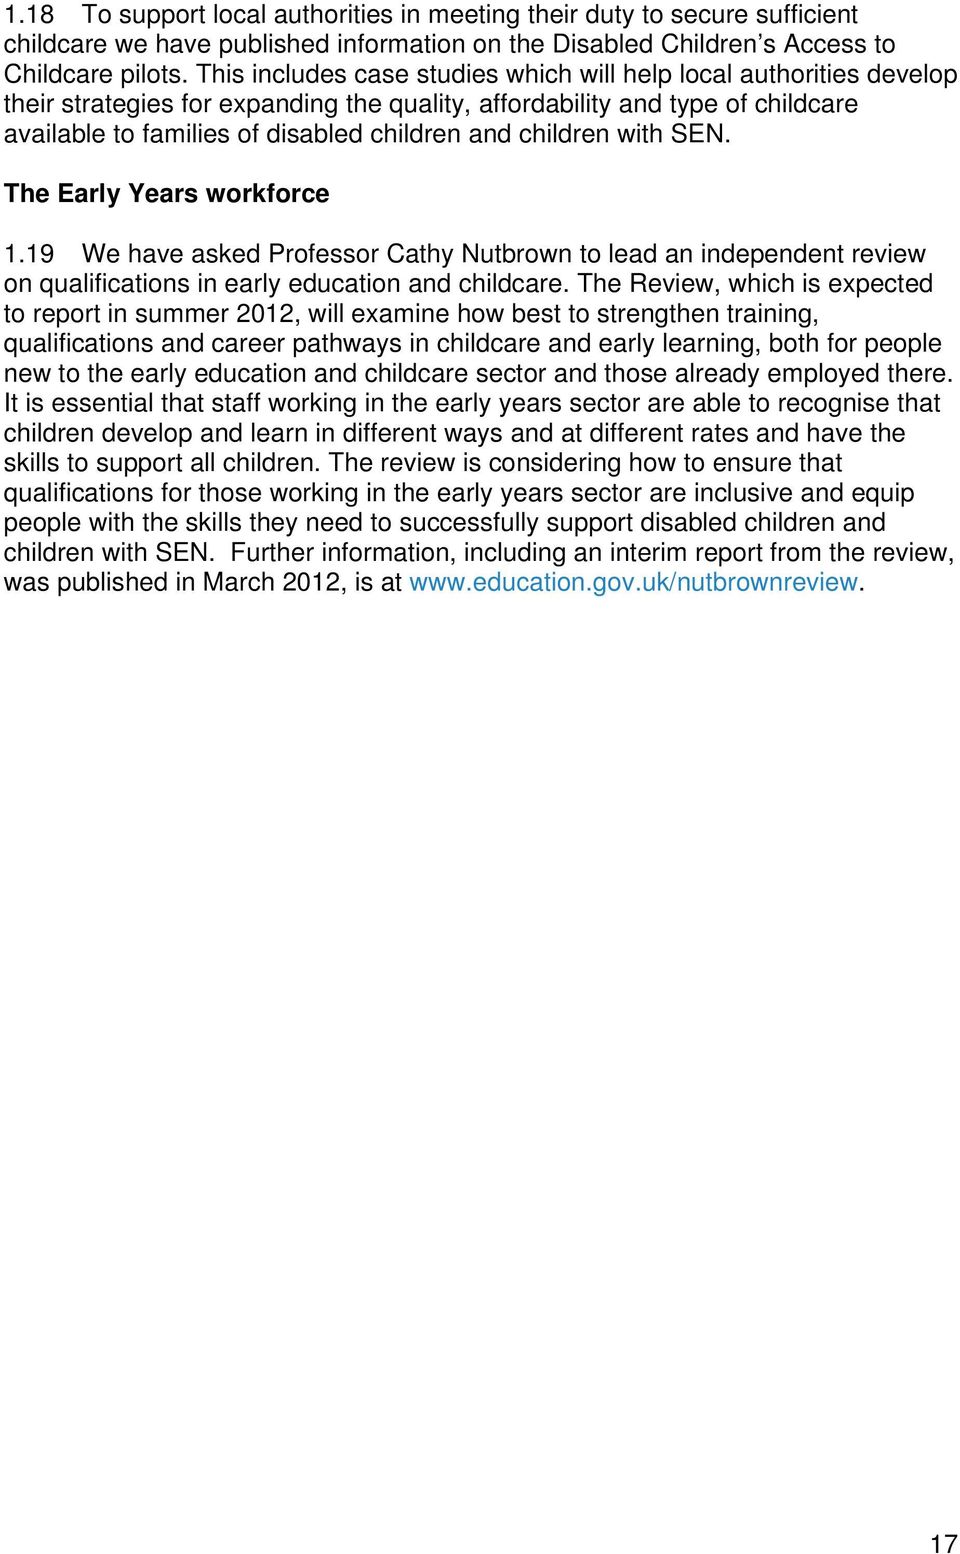 children with SEN. The Early Years workforce 1.19 We have asked Professor Cathy Nutbrown to lead an independent review on qualifications in early education and childcare.